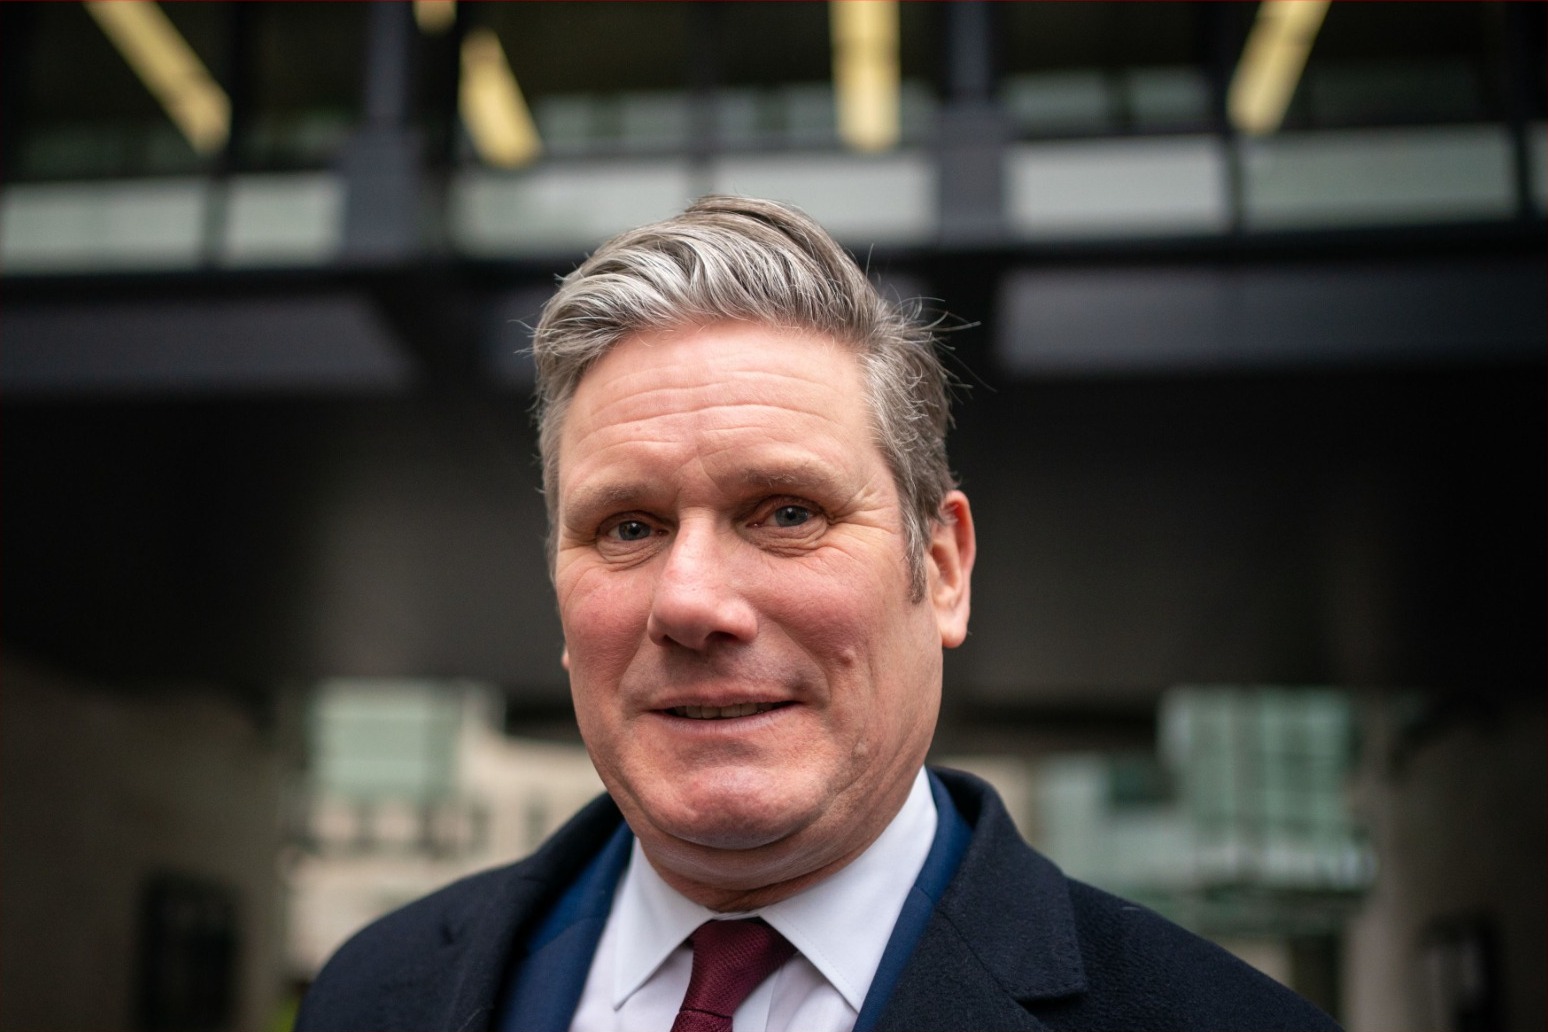 Keir Starmer ‘not ducking scrutiny’ over Covid questions, ally insists 